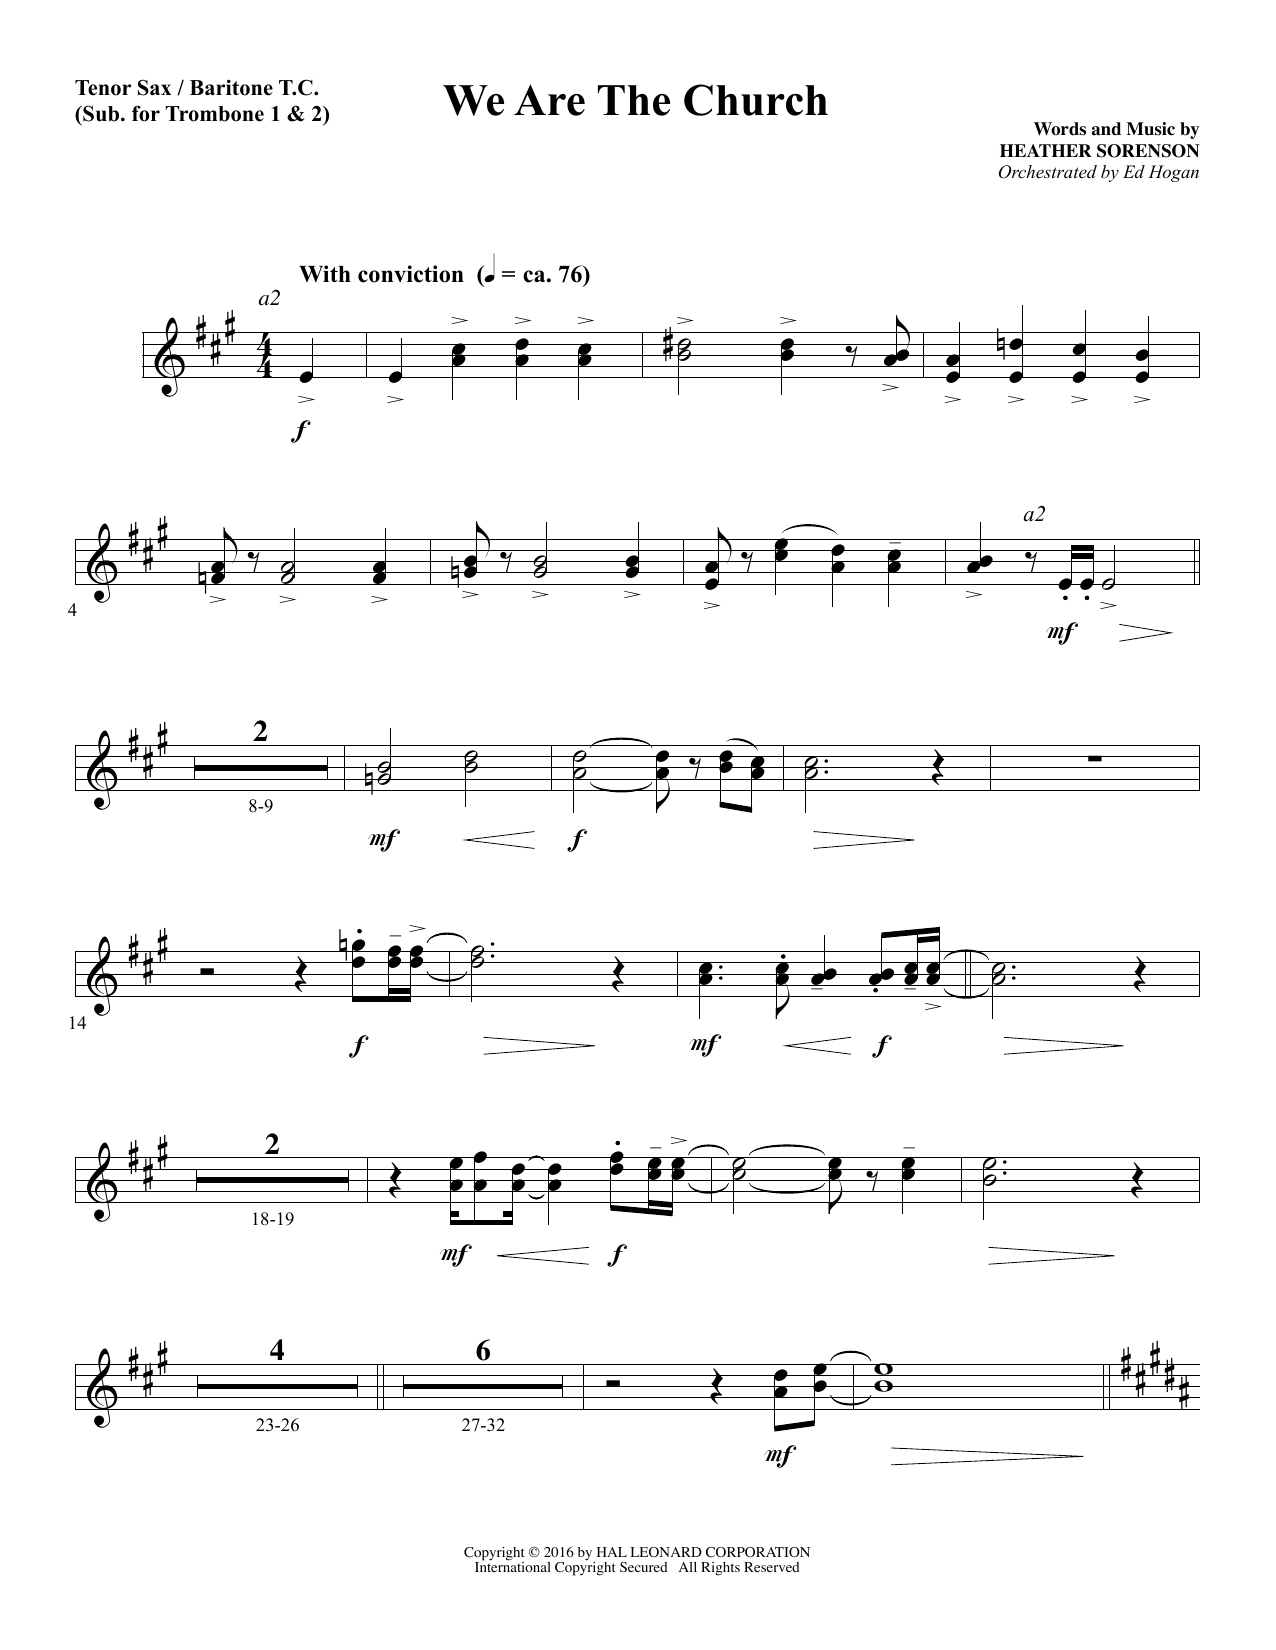 Download Heather Sorenson We Are the Church - Tenor Sax/BariTC (sub Tbn 1-2) sheet music and printable PDF score & Sacred music notes